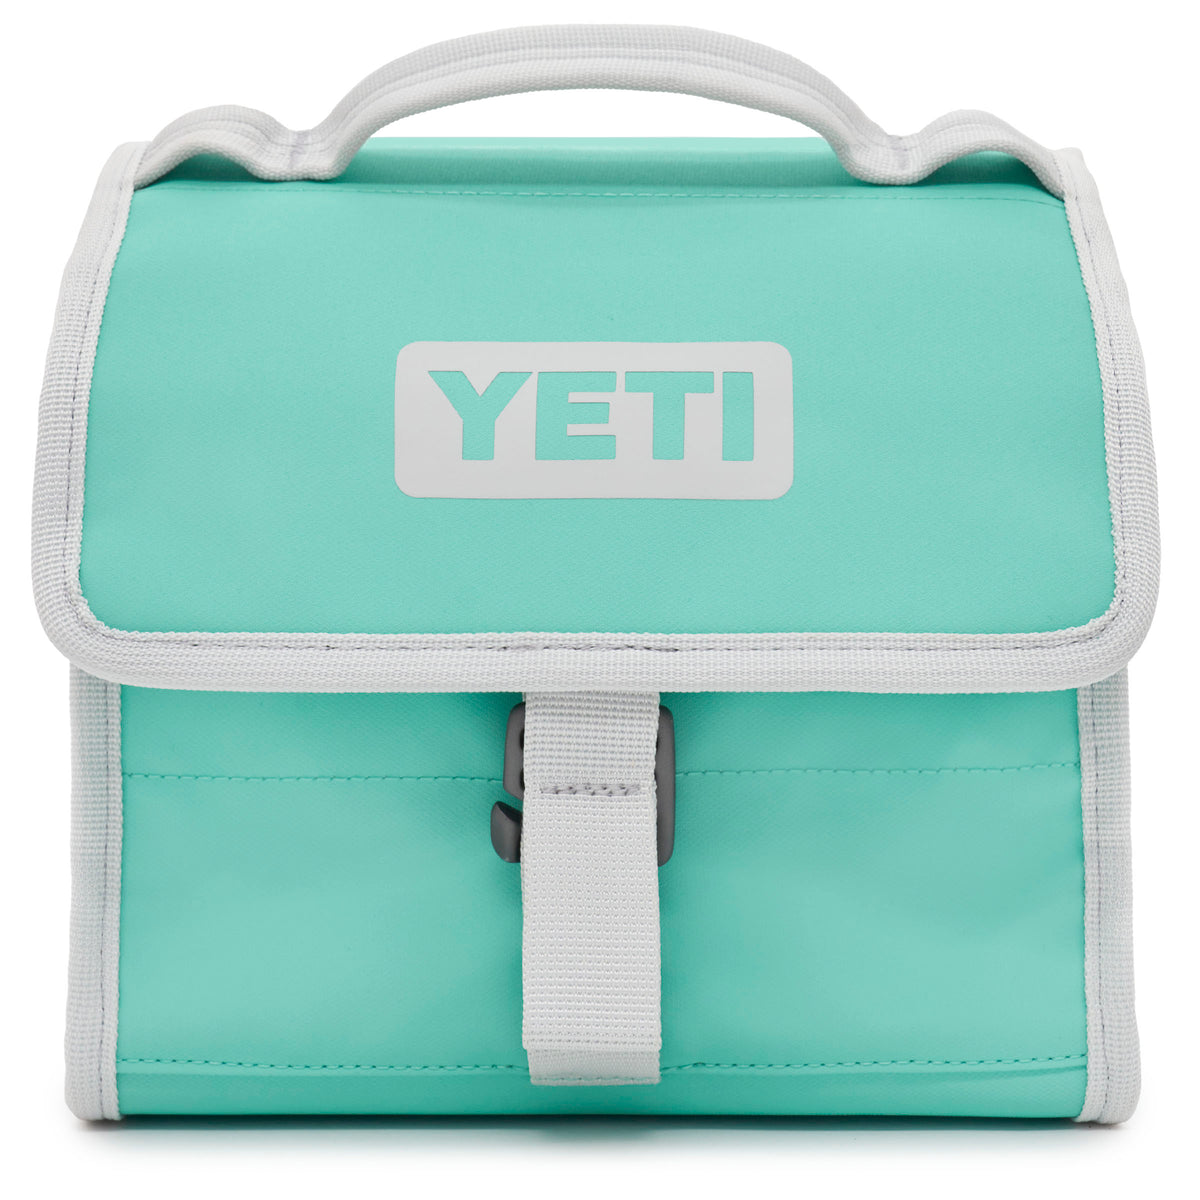 YETI CORAL 🪸 DayTrip Lunch Box - Limited Edition Color - NWT RARE